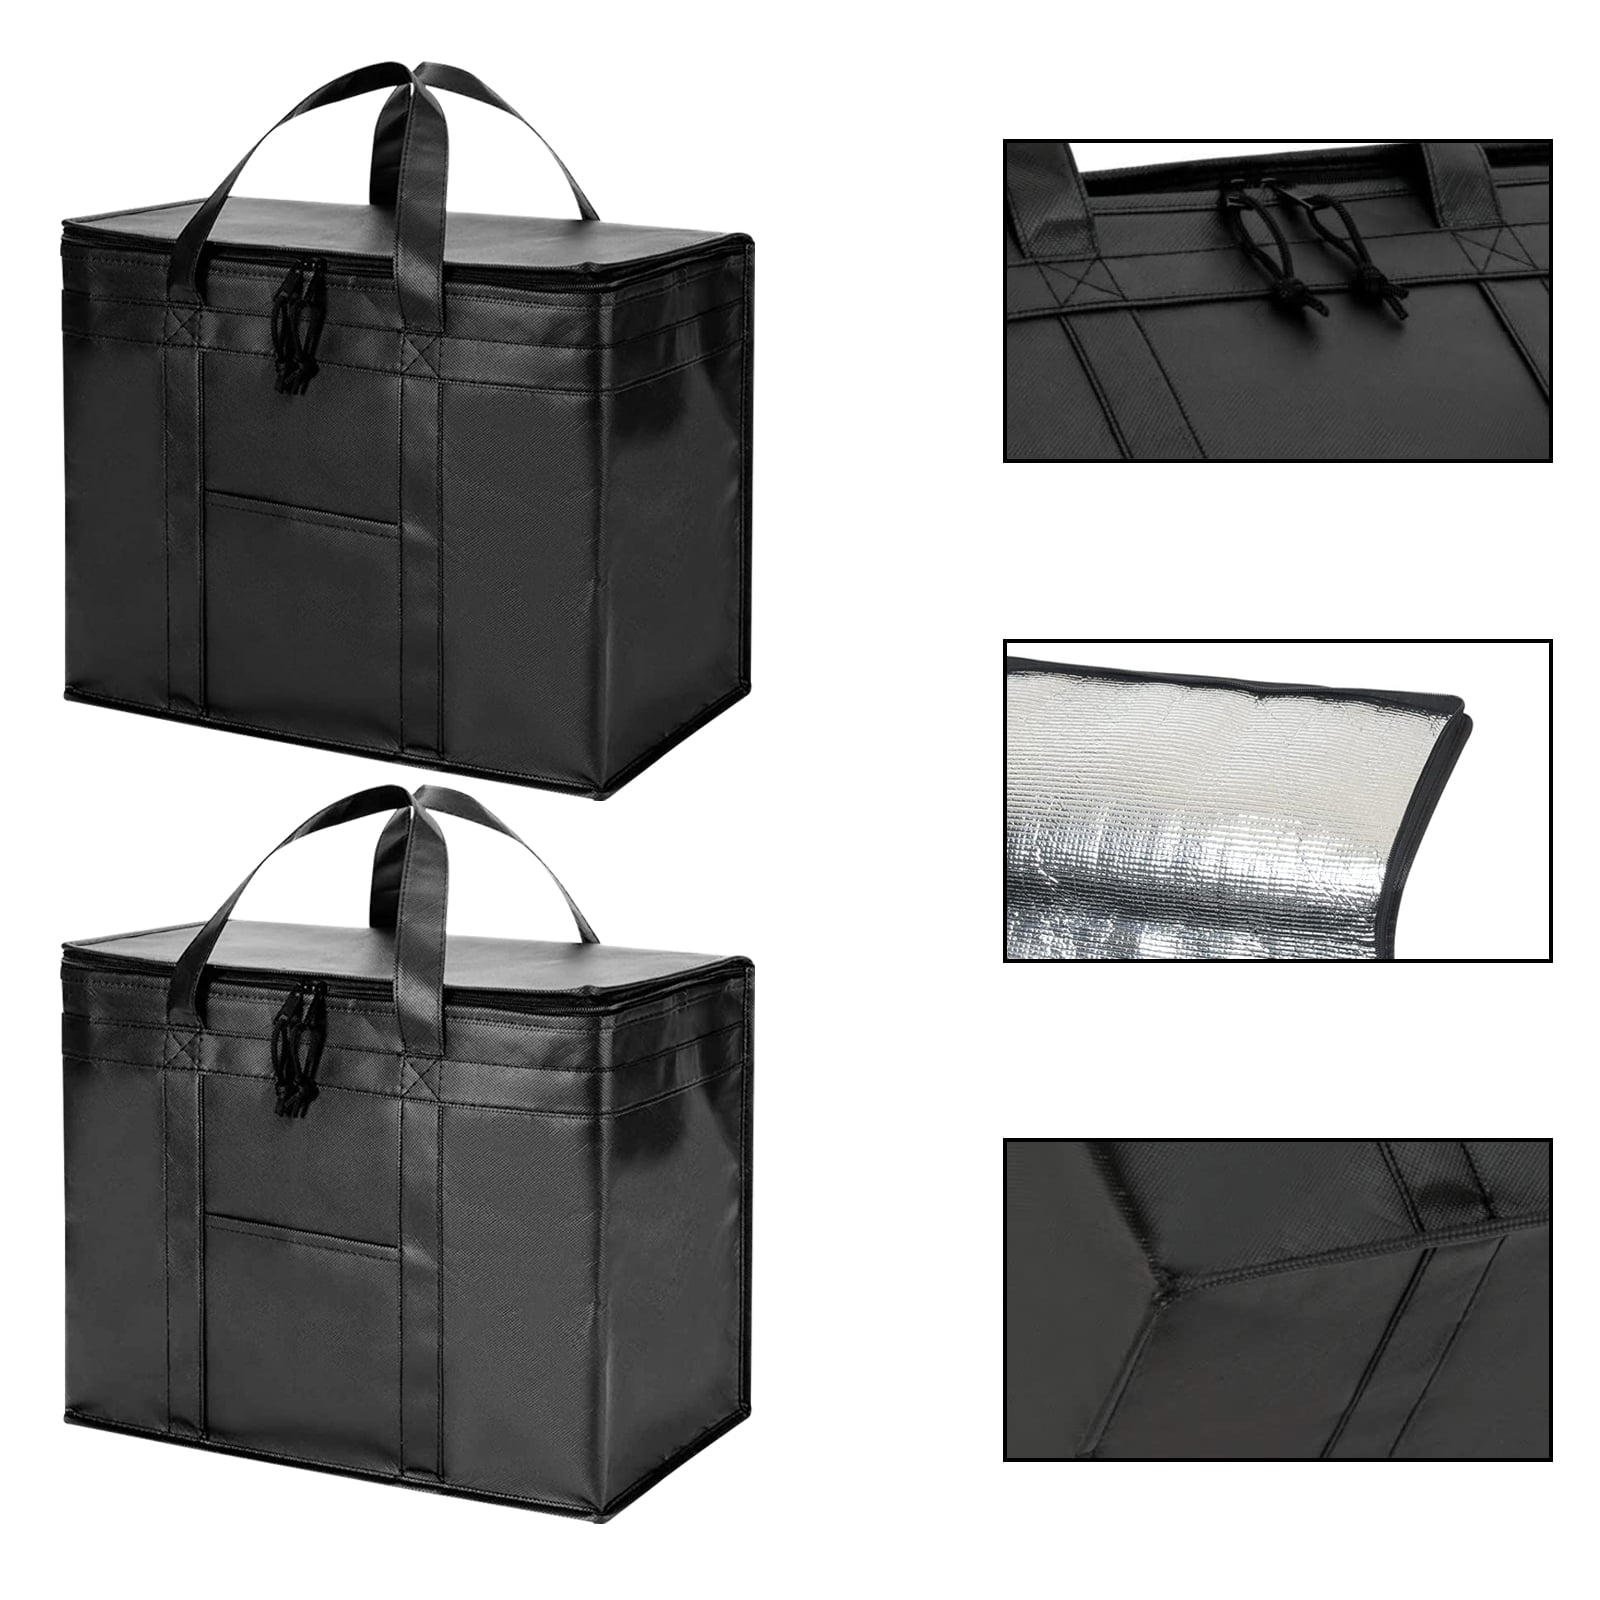 2 Insulated Reusable Grocery Shopping Bags Xl Large Picnic Cooler Bag Black 